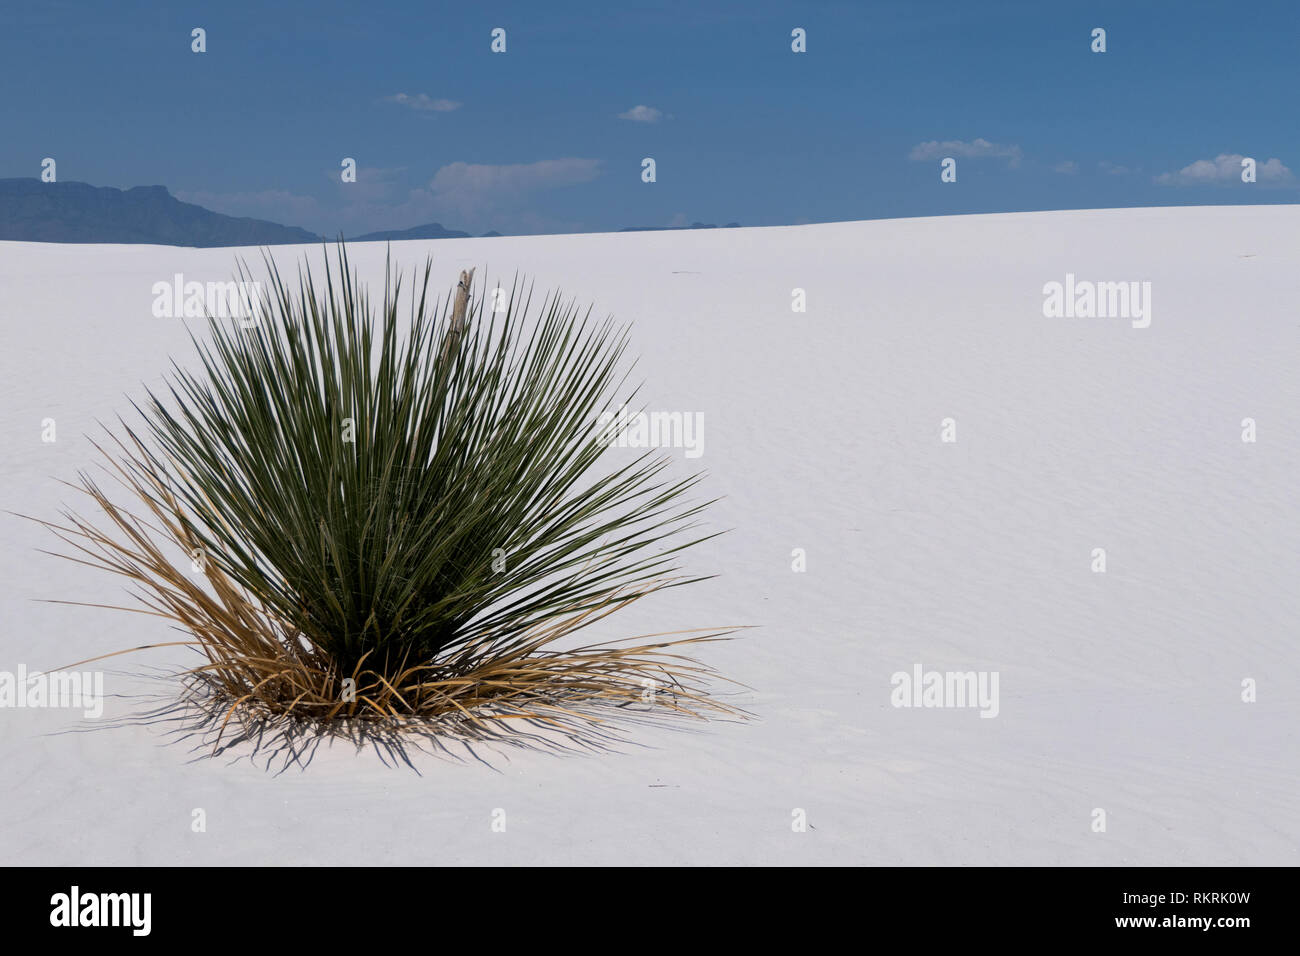 Dunes with soaptree yucca (Yucca elata) plants on sand at White Sands National Monument in New Mexico, United States of America. American park nature, Stock Photo